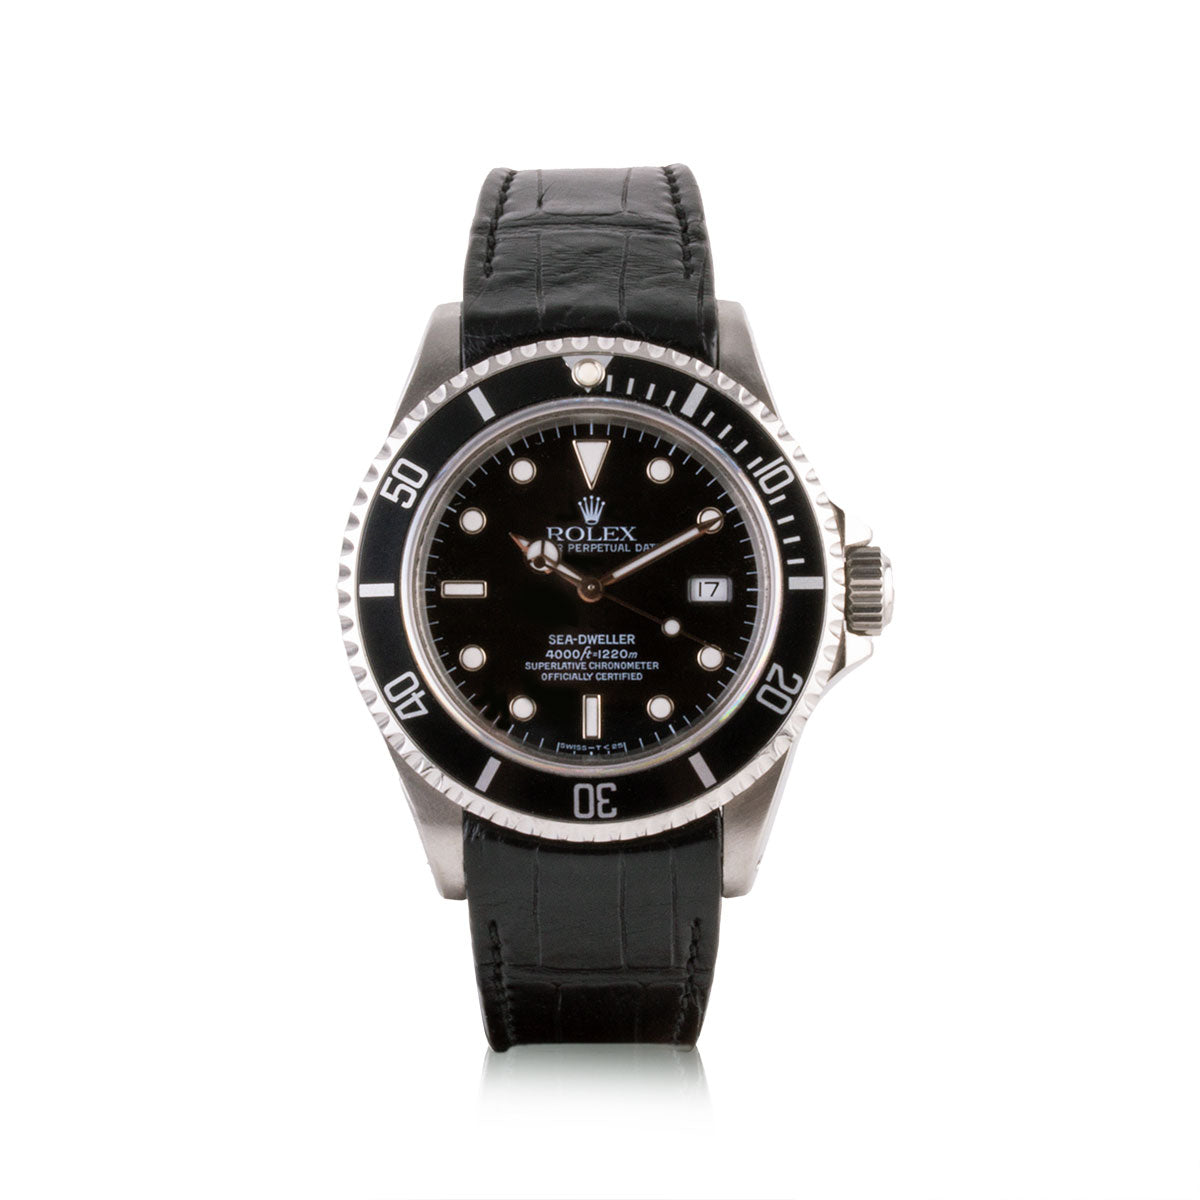 Second-hand watch - Rolex - Oyster Perpetual Date Sea-Dweller - 10400€